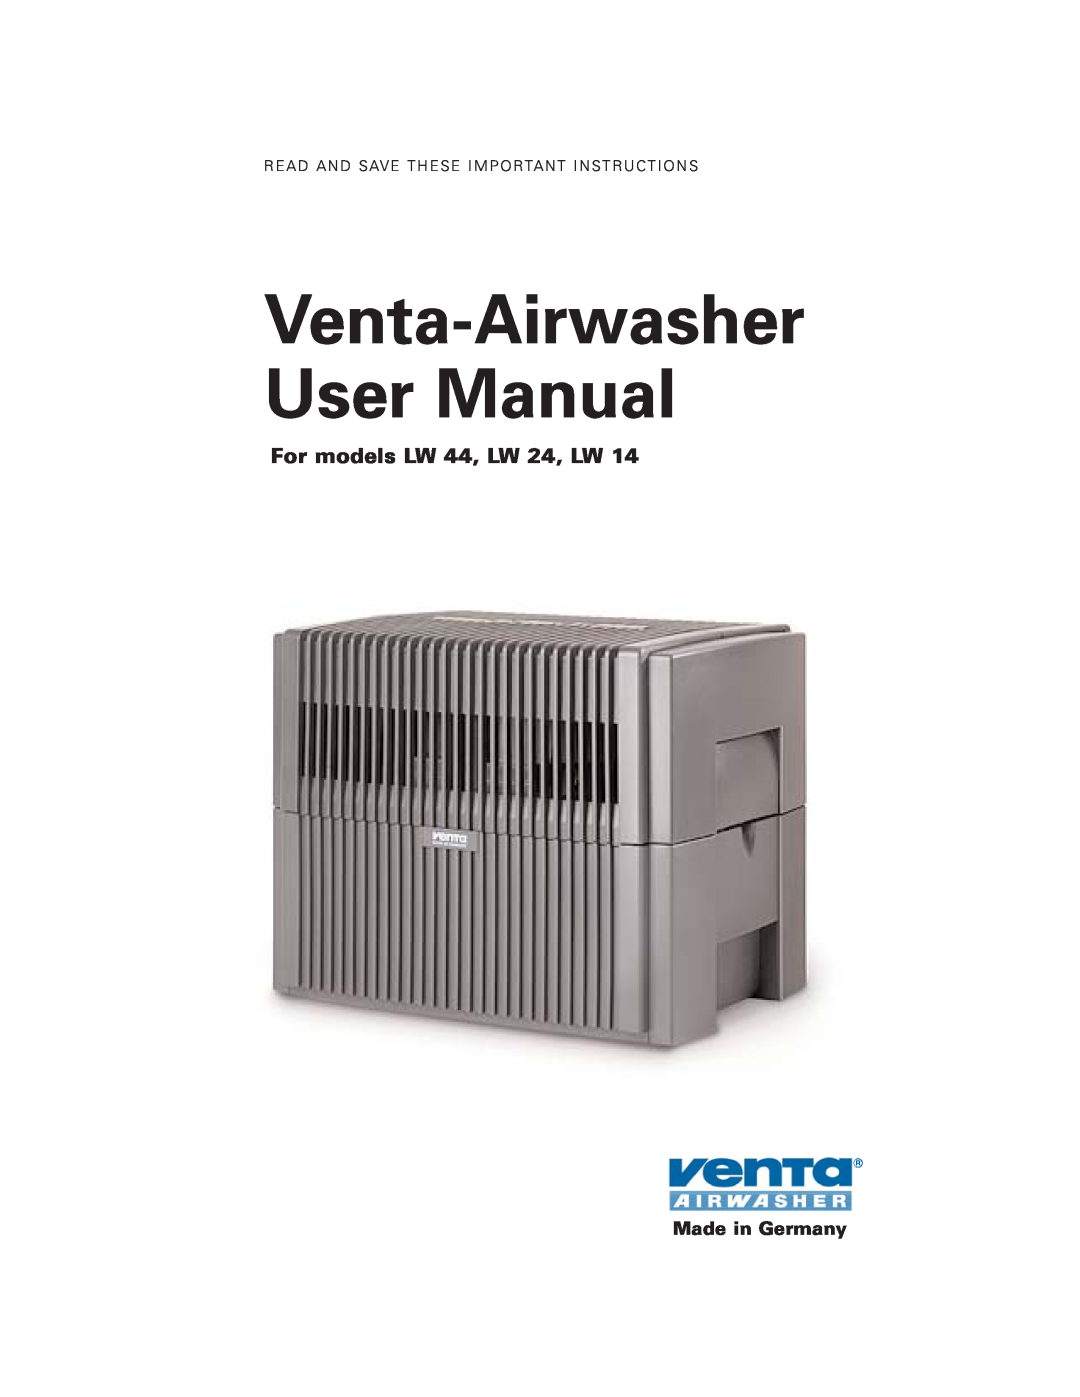 Venta Airwasher LW 14 user manual For models LW 44, LW 24, LW, Made in Germany 